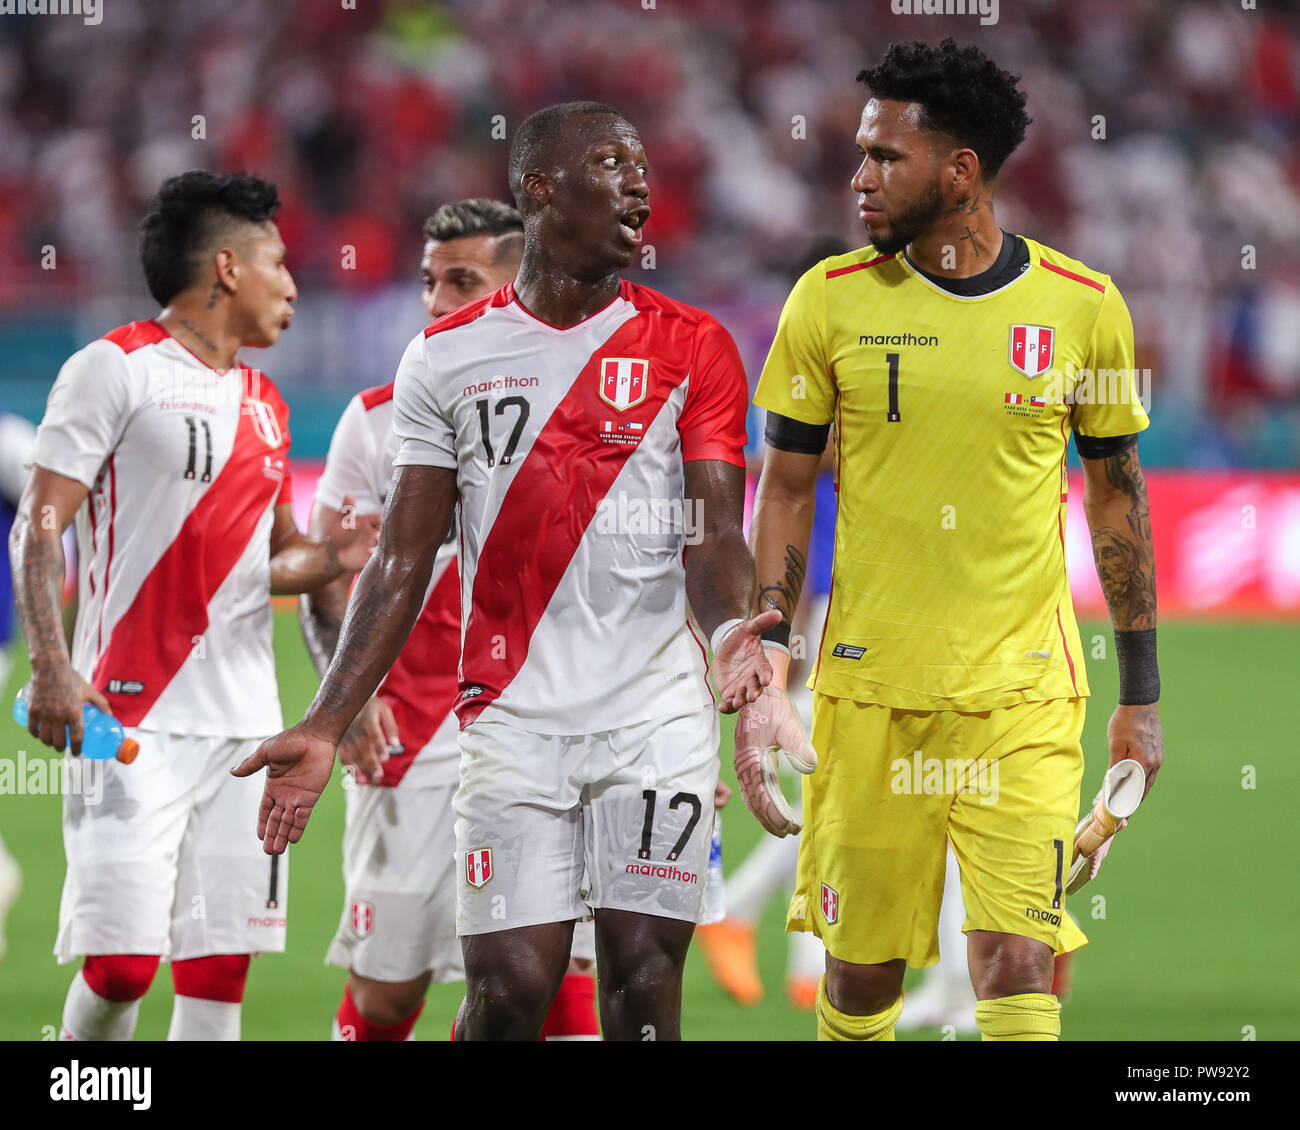 Miami Gardens, Florida, USA. 12th Oct, 2018. Peru defender LUIS ADVINCULA (17) talks to goalkeeper PEDRO GALLESE (1) as they exit the field after the first half of an international friendly match between the Peru and Chile national soccer teams, at the Hard Rock Stadium in Miami Gardens, Florida. Credit: Mario Houben/ZUMA Wire/Alamy Live News Stock Photo